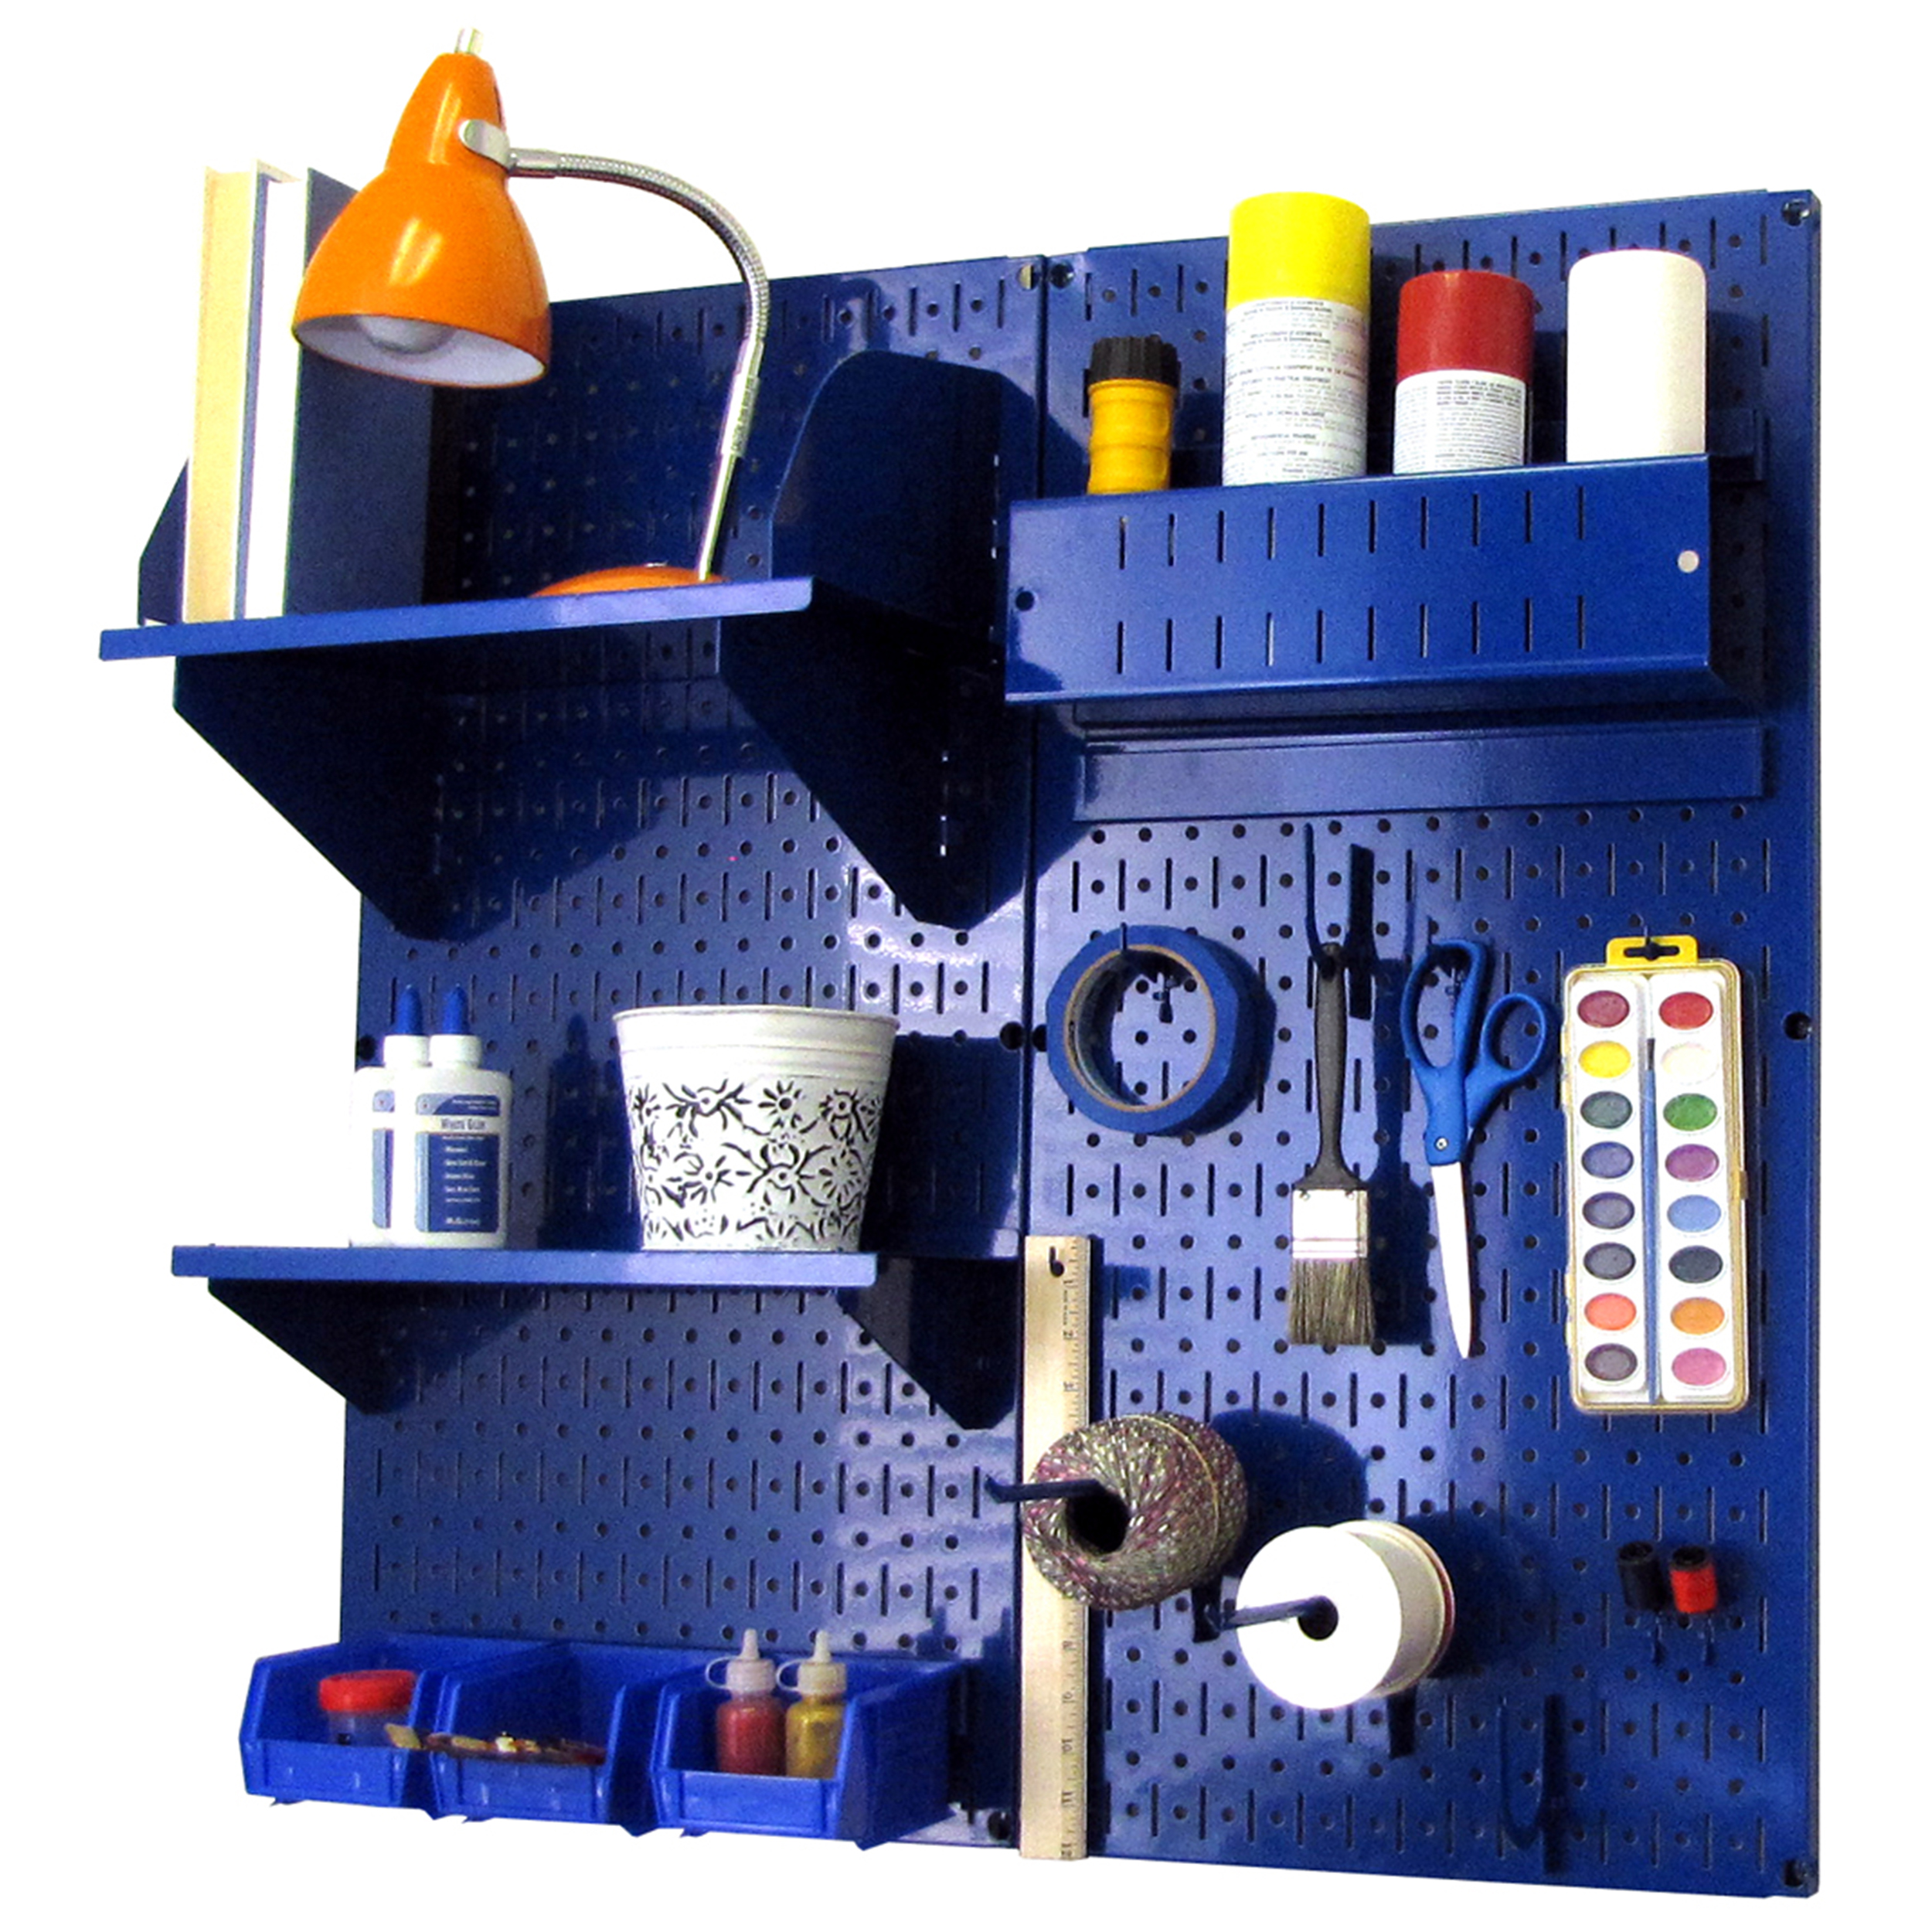 Pegboard Hobby Craft Pegboard Organizer Storage Kit With Blue Pegboard And Blue Accessories